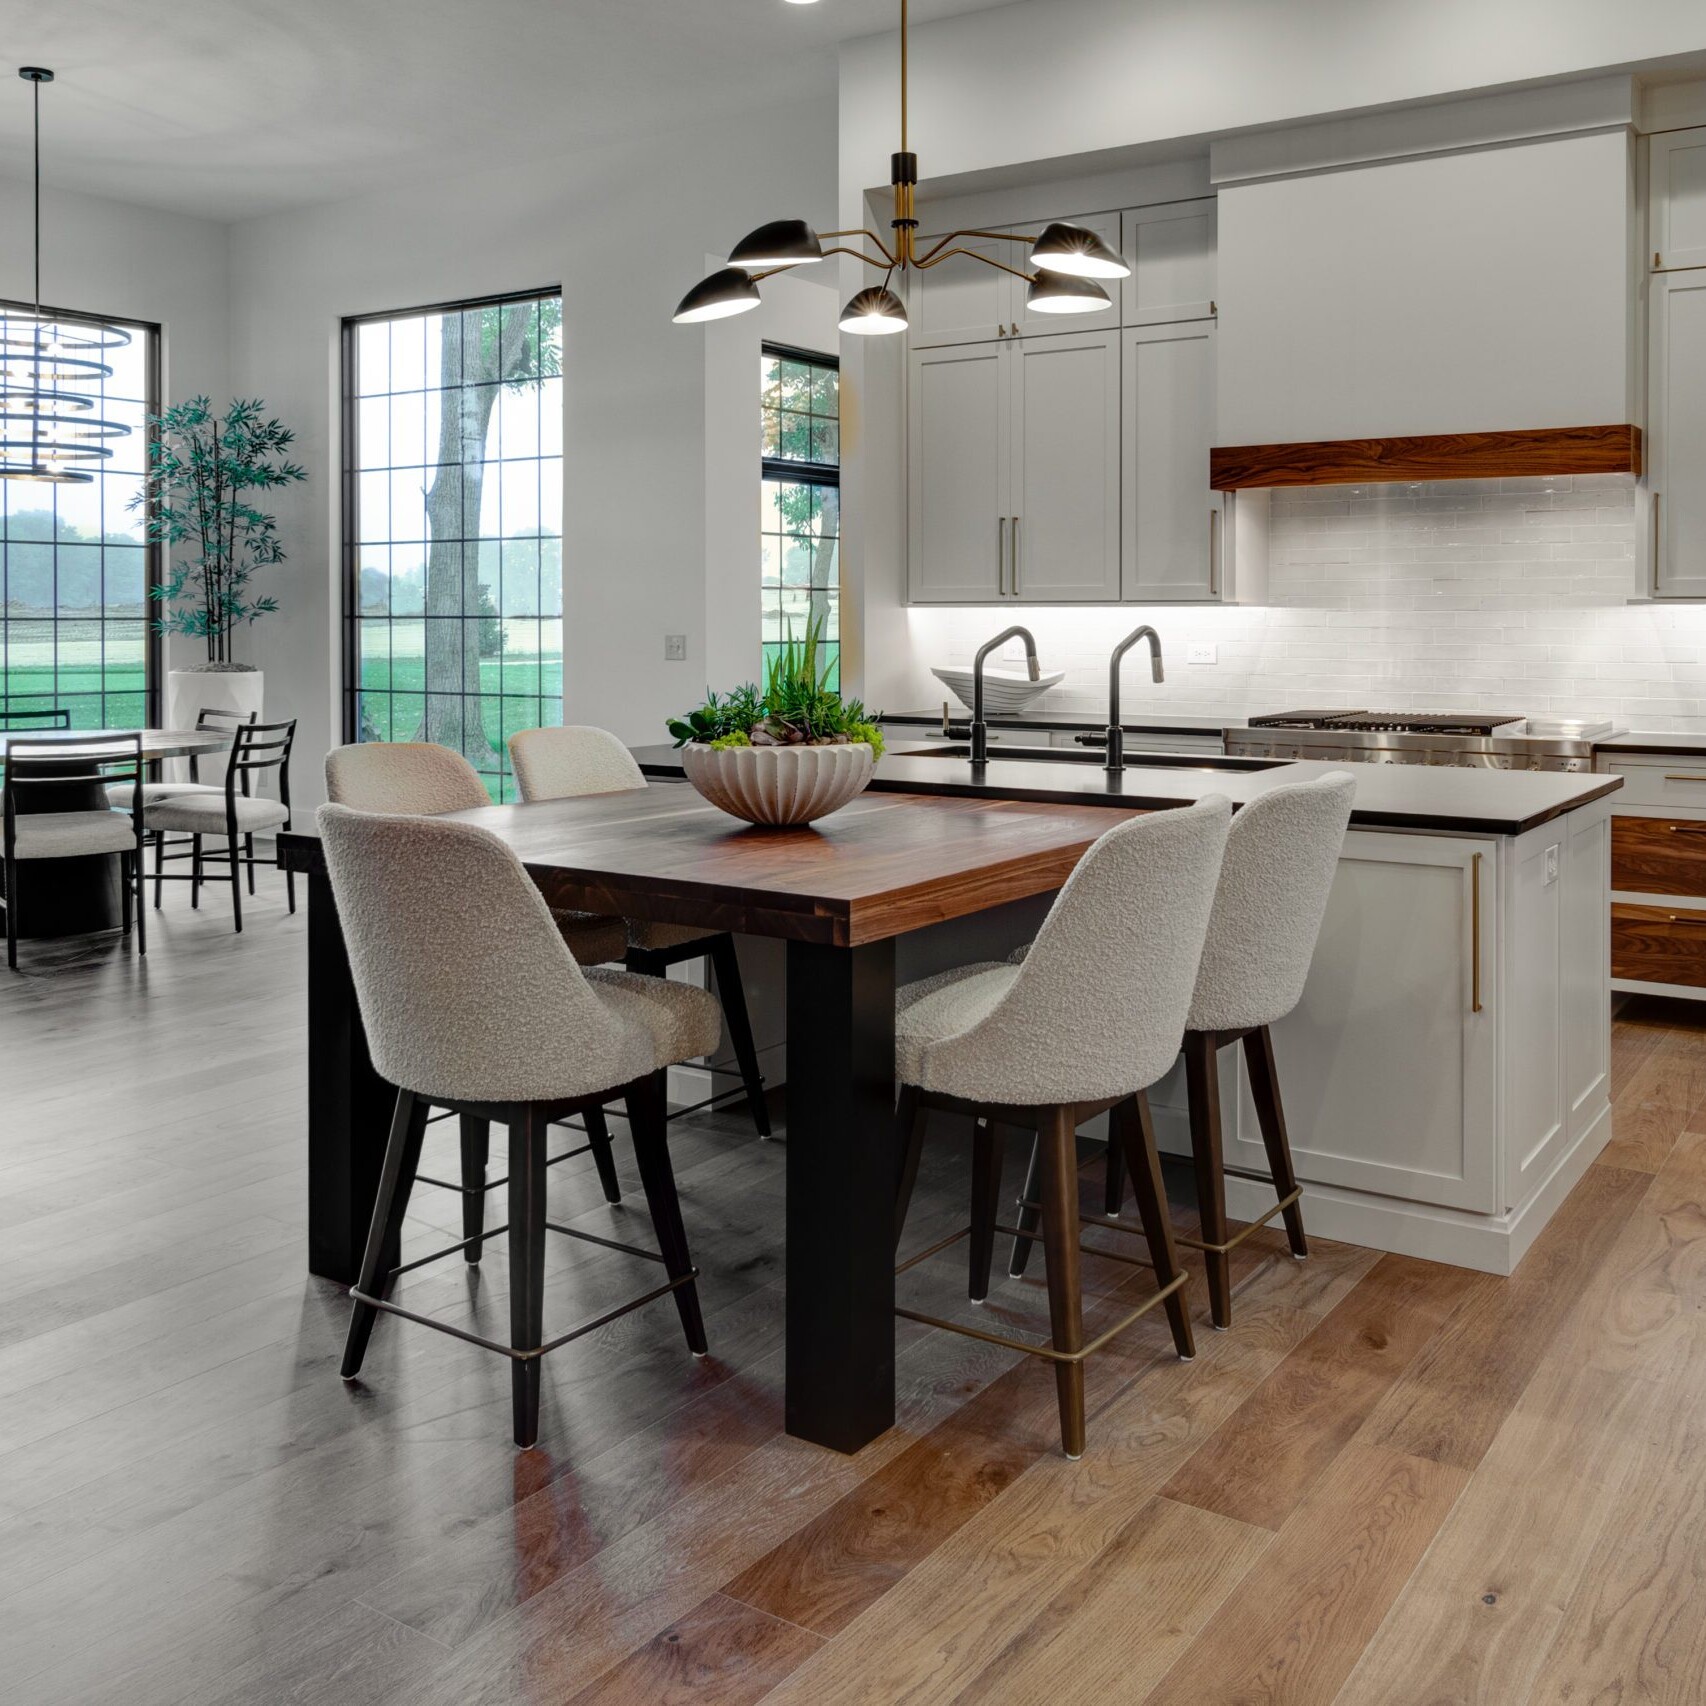 A kitchen with wood floors and a dining table.